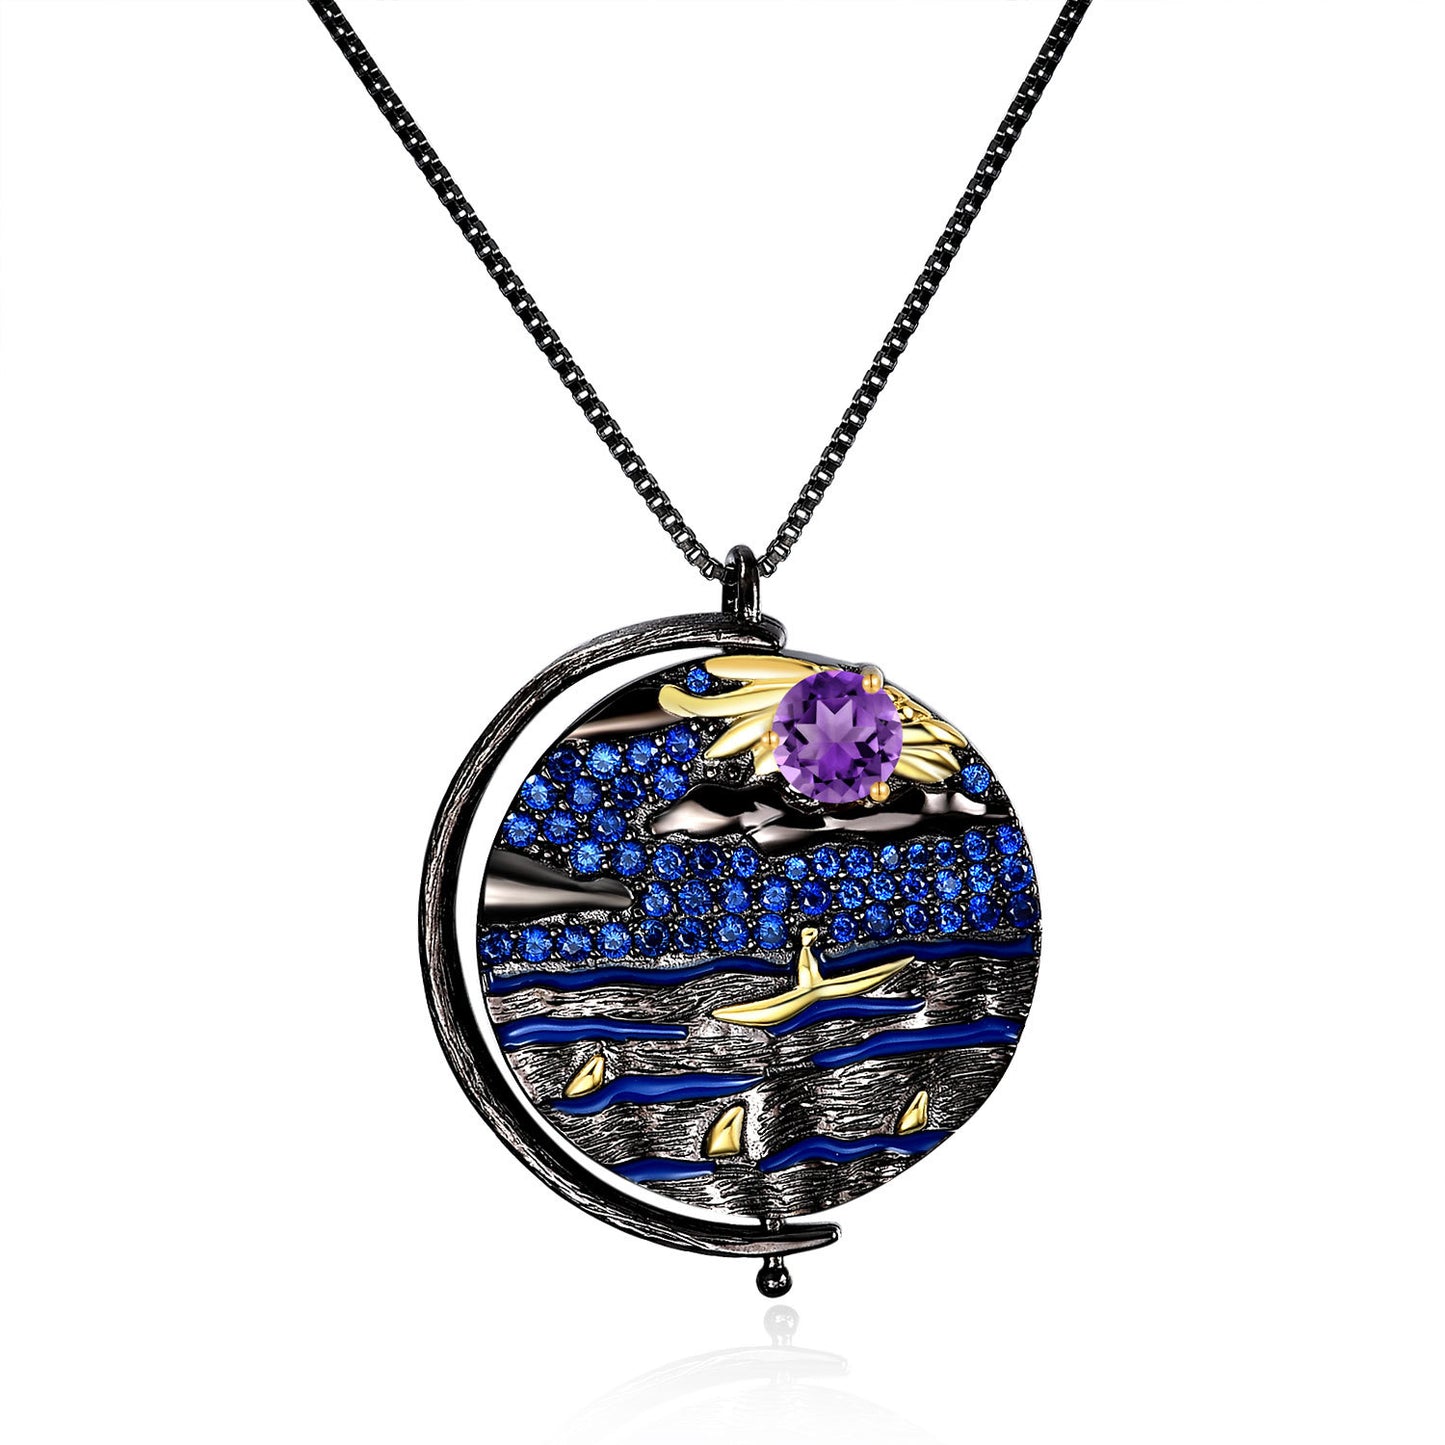 Italian Abstract Pattern Vintage Jewelry Design Inlaid Colorful Gemstone Boat In Lake Circle Pendant Silver Necklace for Women